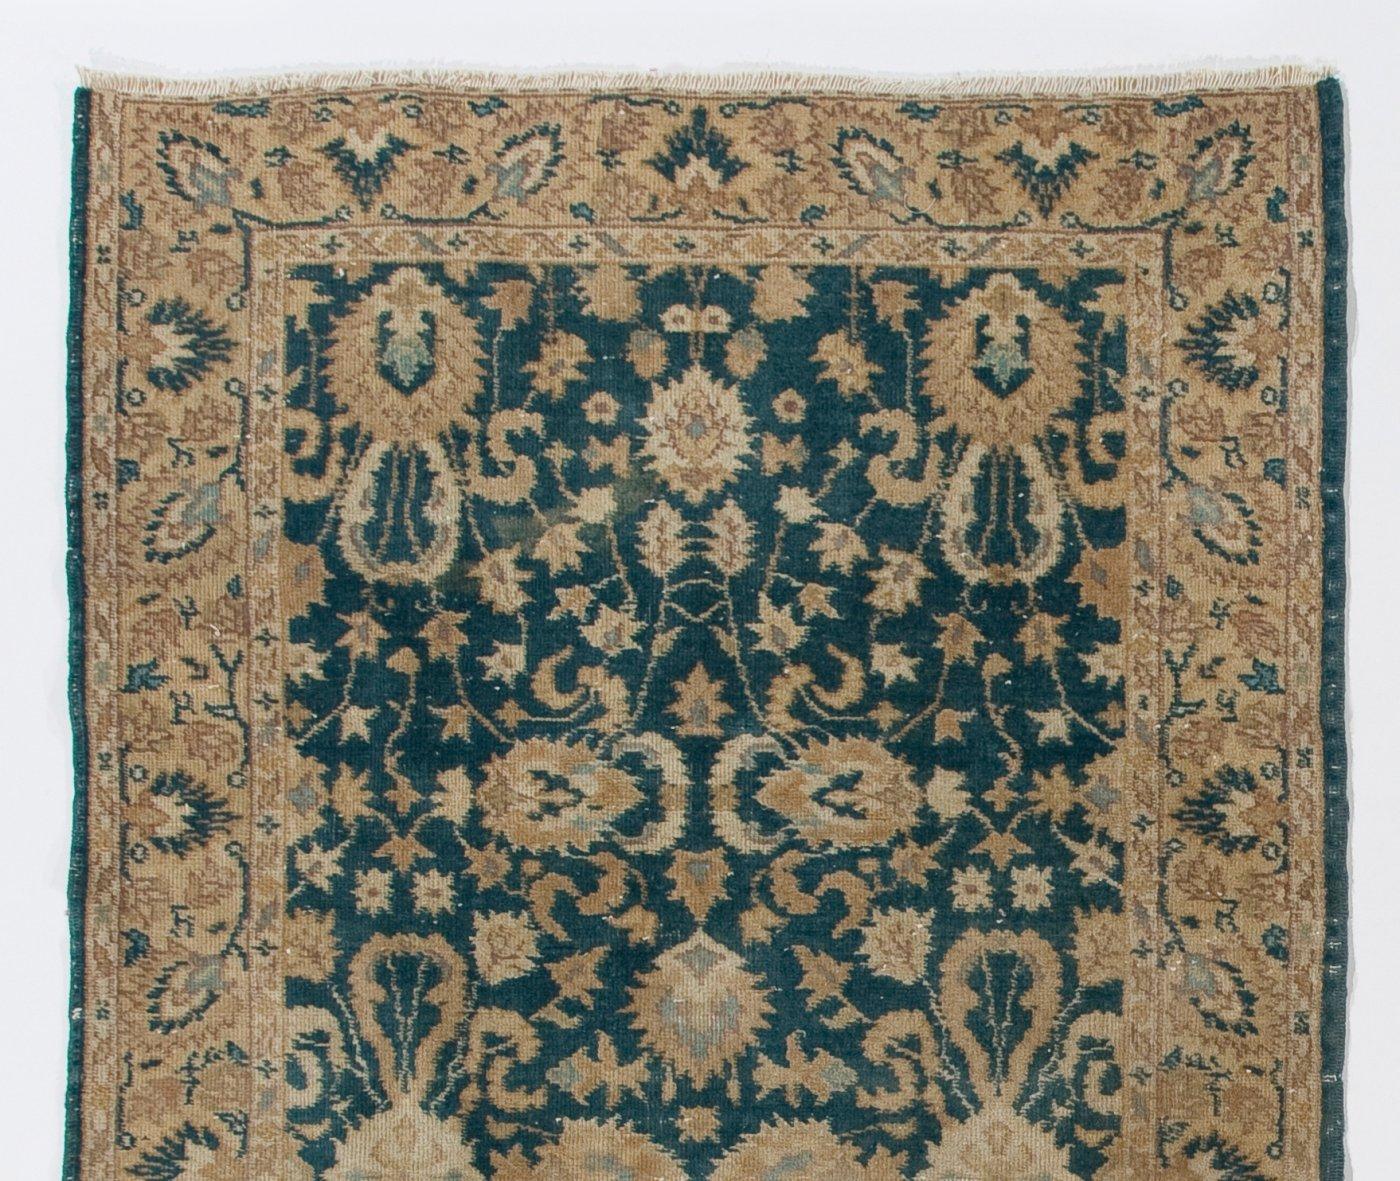 This vintage Central Anatolian accent rug in green and beige colors. It was hand-knotted in the 1950s and floral design. Low wool pile on finely woven cotton foundation. Sturdy and can be used on a high traffic area, suitable for both residential